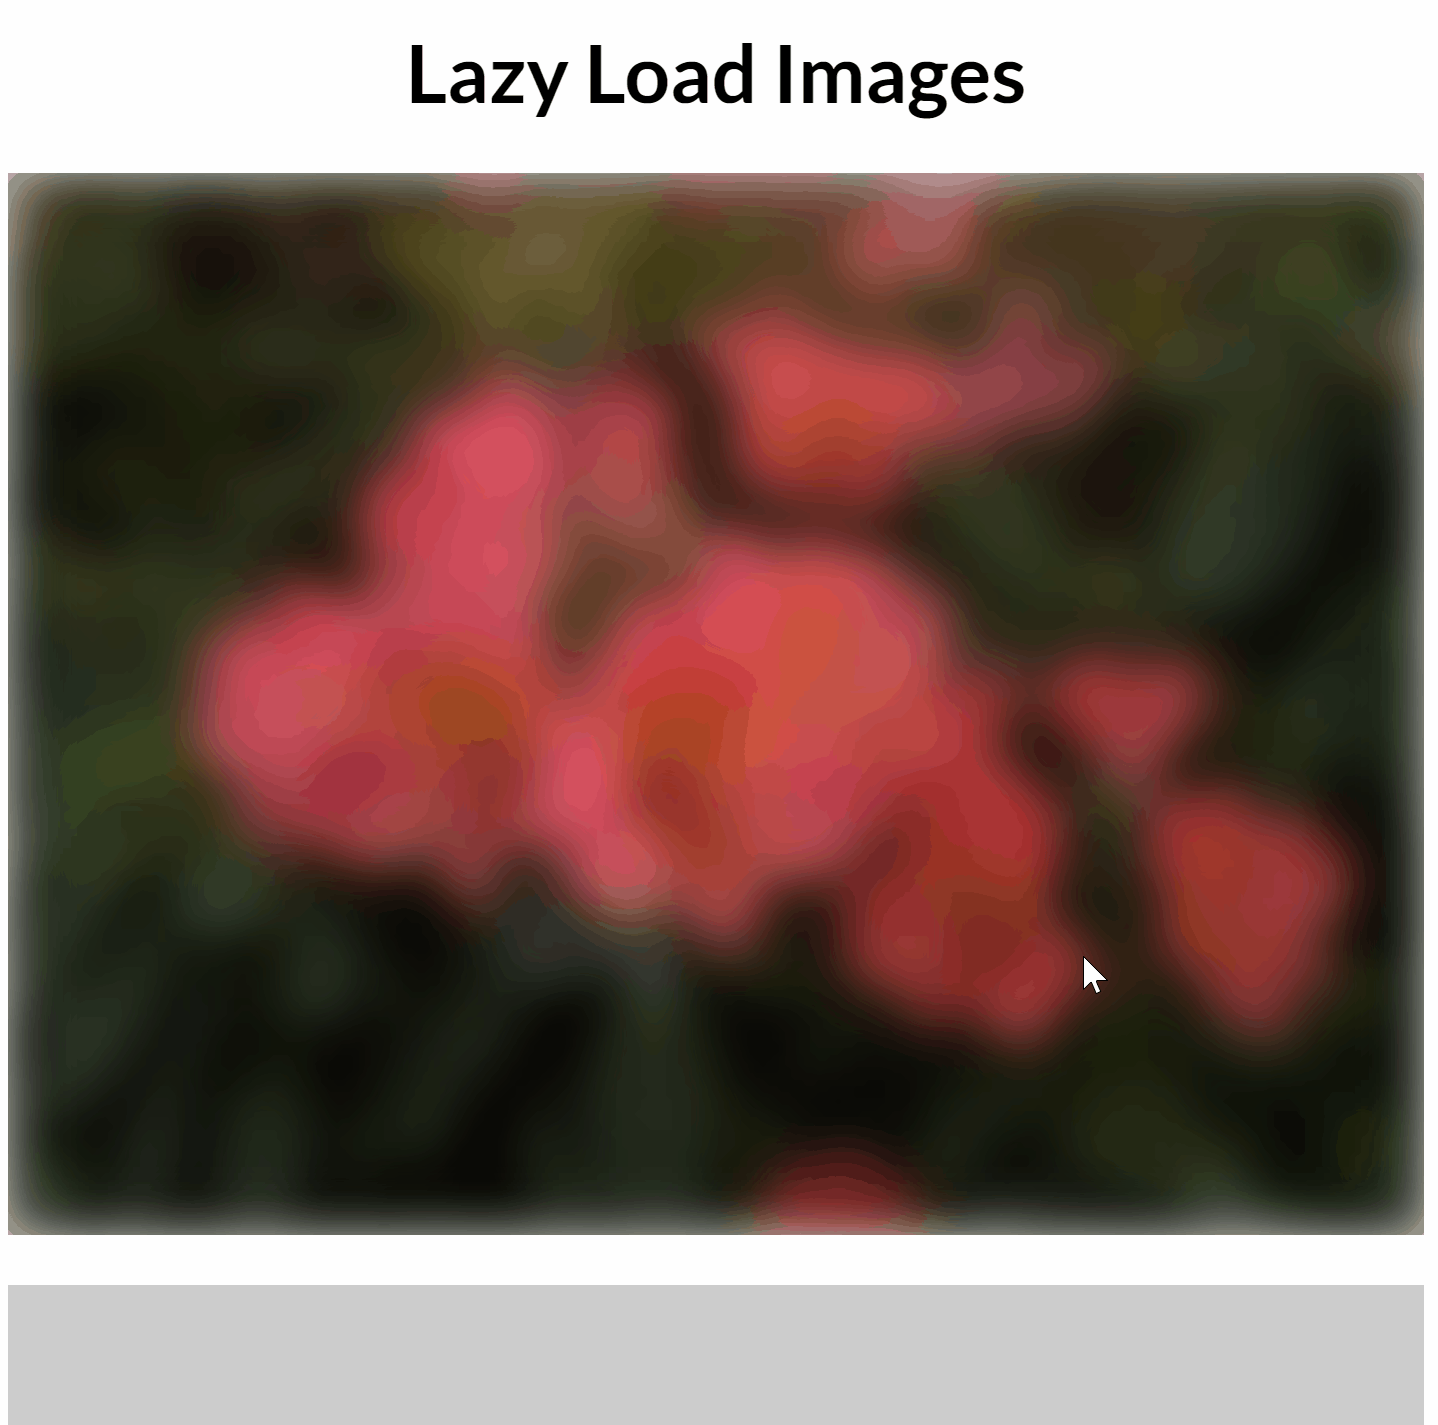 Final Lazy loaded Image with blur effect